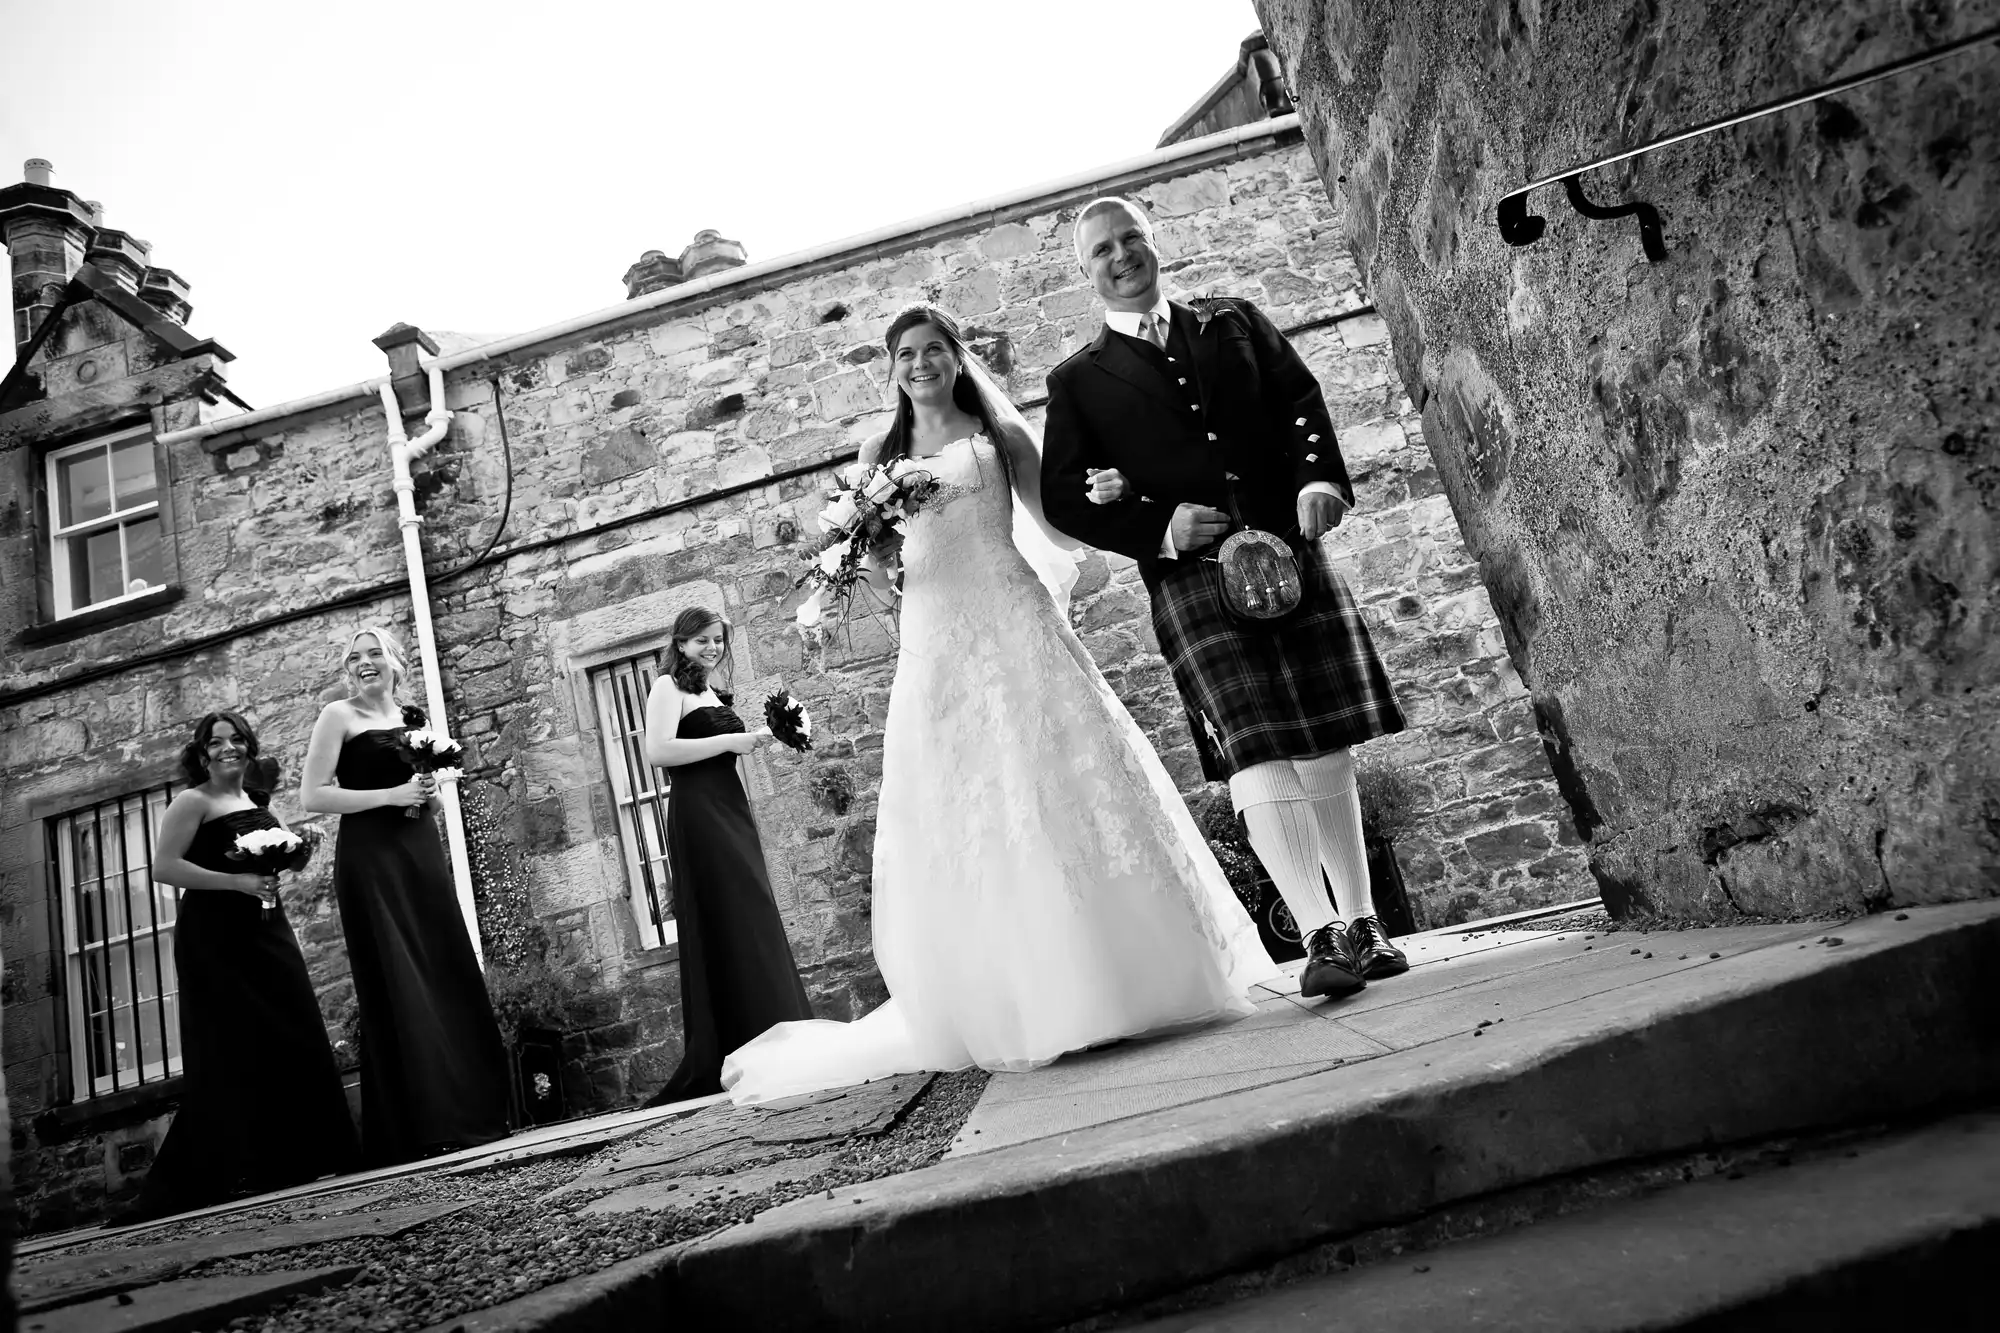 Bride and groom walking happily, the groom in a kilt, accompanied by bridesmaids in black dresses, outside a stone building.